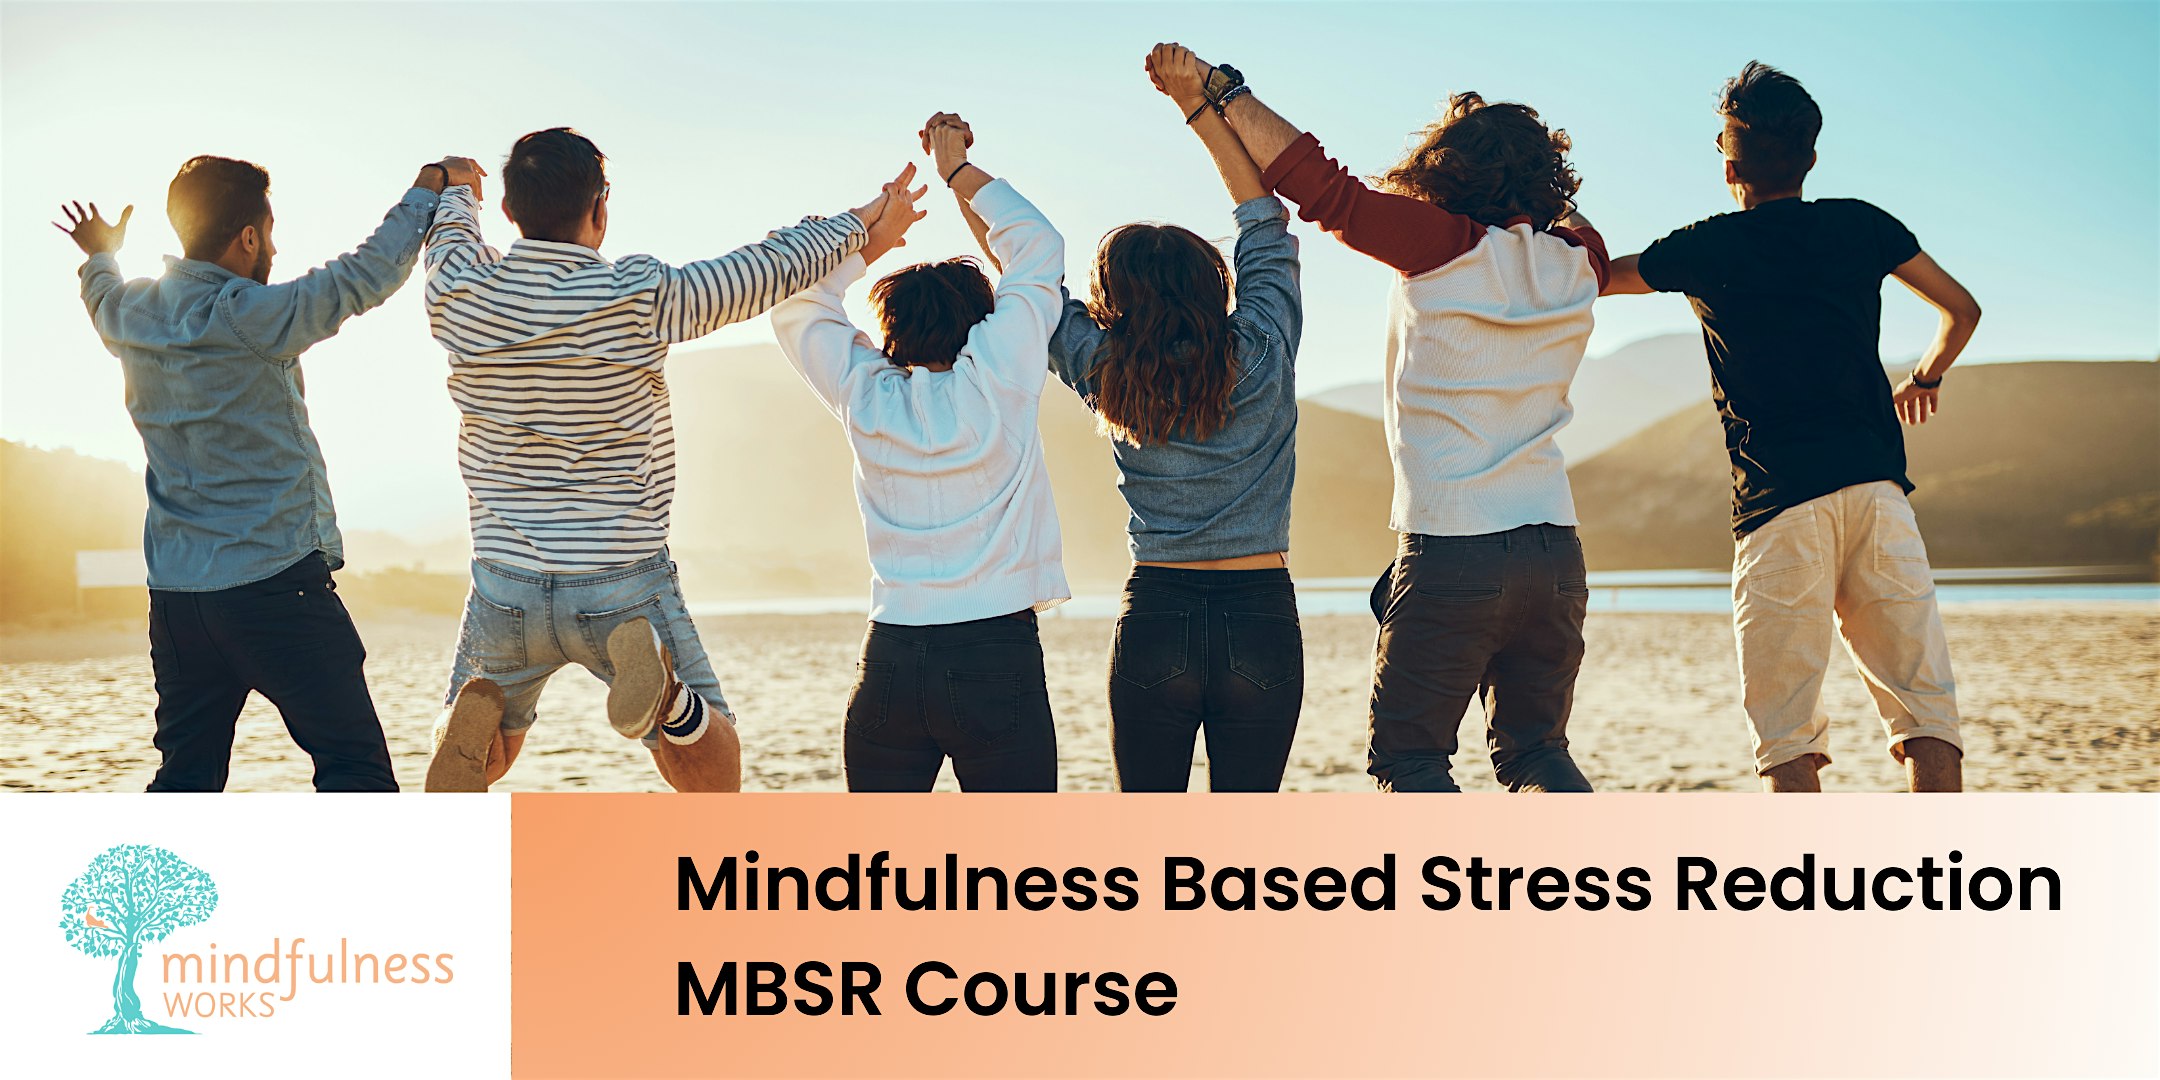 Mindfulness Based Stress Reduction (MBSR) 8 Week Course & Day Retreat.